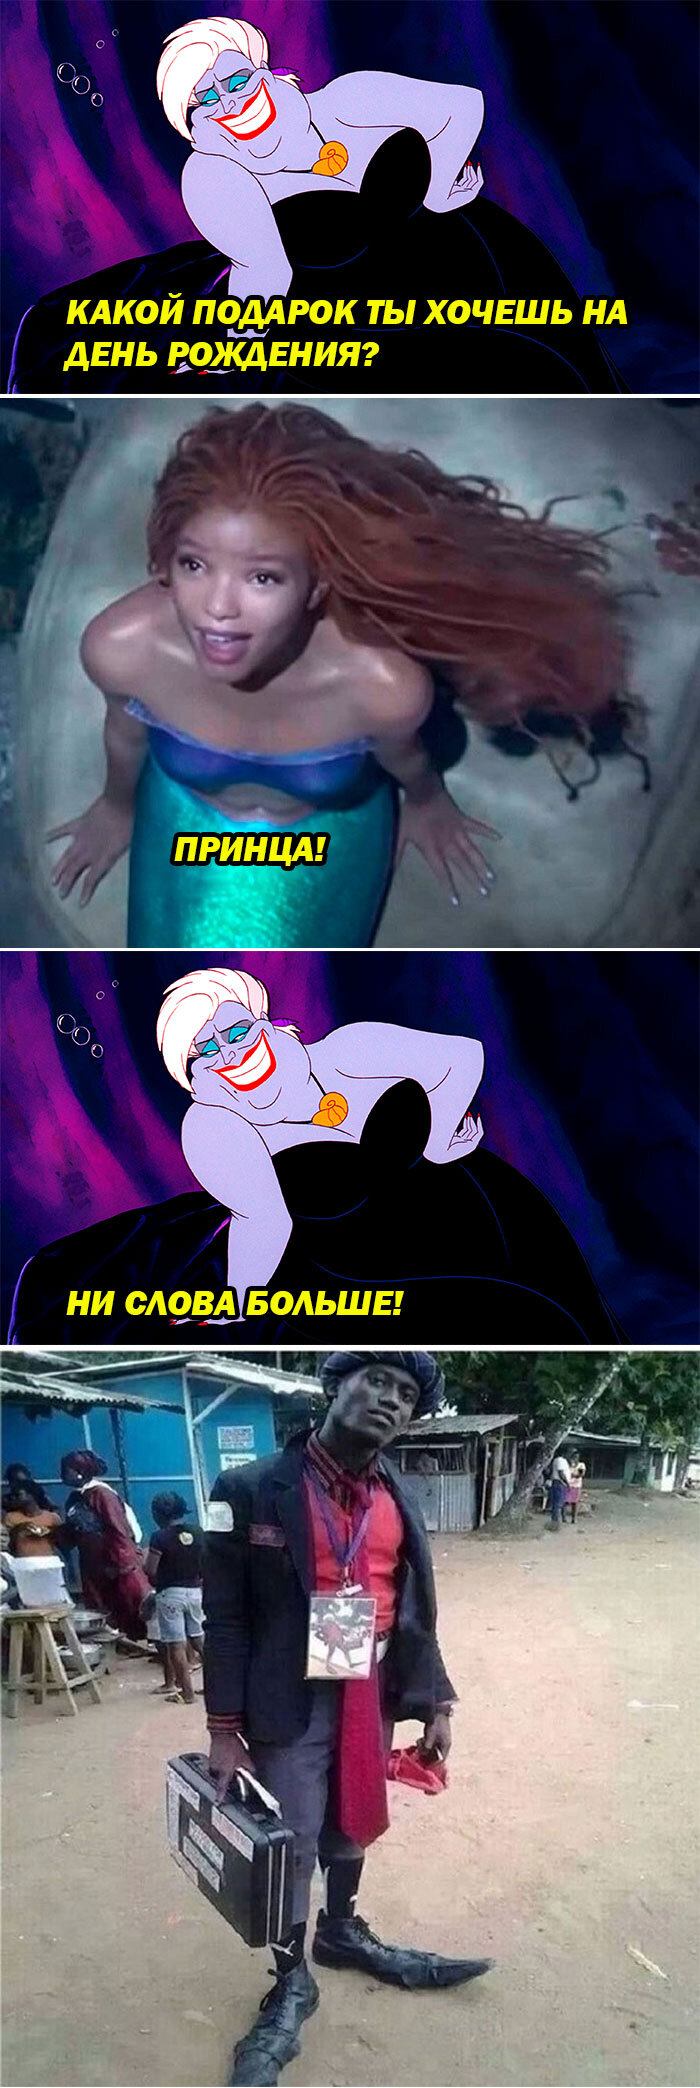 Prince for the Little Mermaid - Humor, Picture with text, the little Mermaid, Ariel, Ursula, Prince, Longpost, Witches